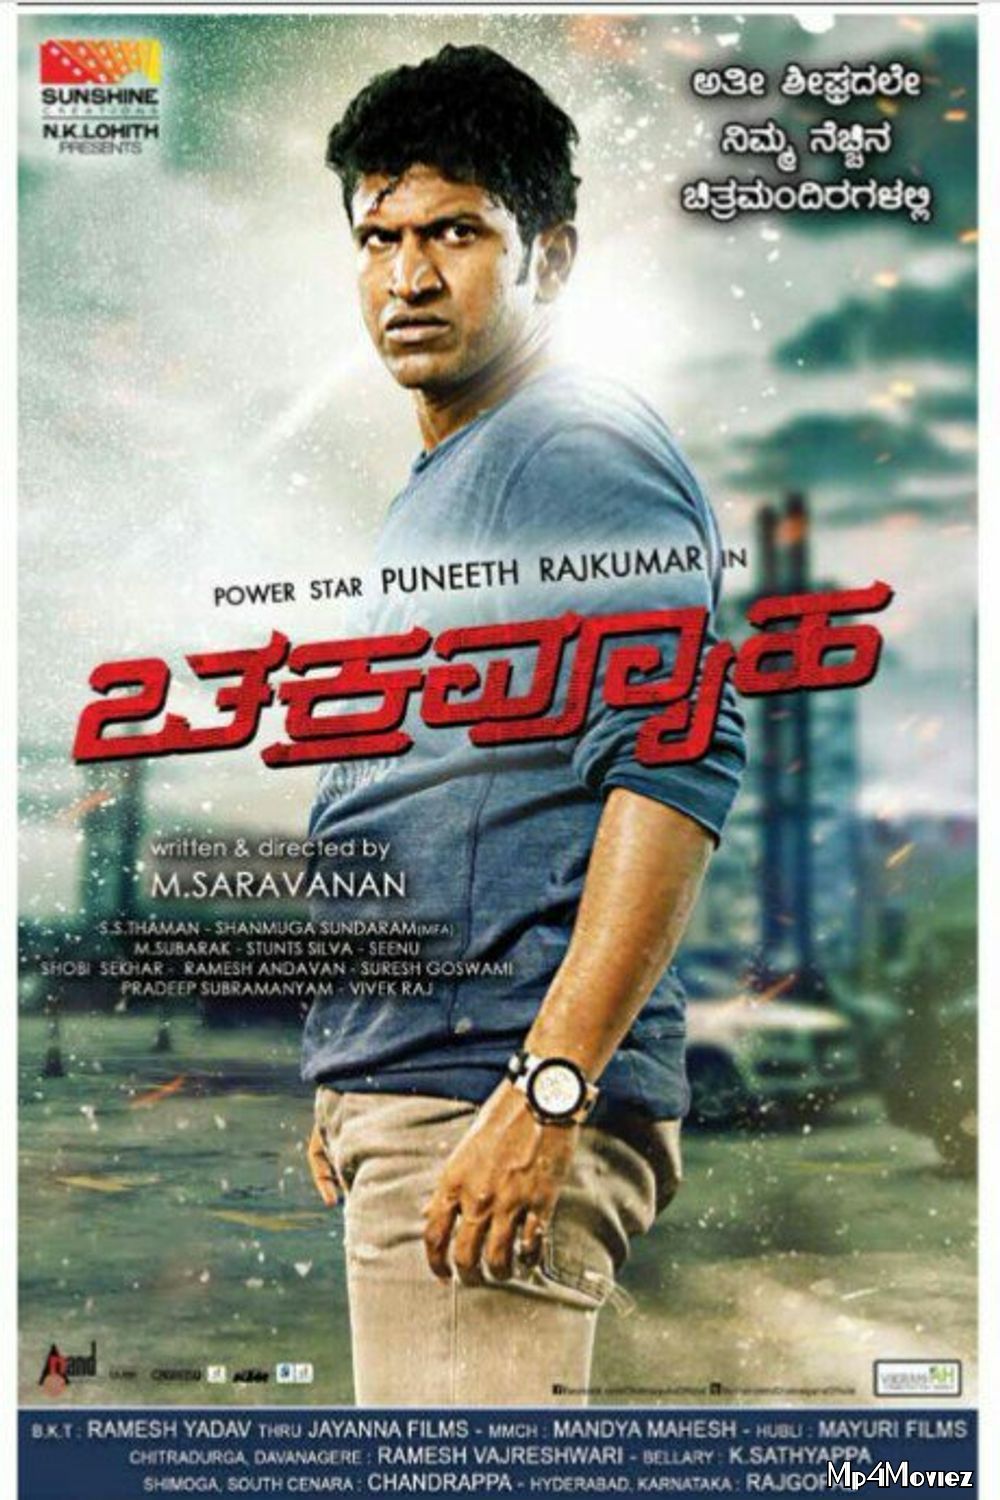 Mission Bharath (Power) 2021 Hindi Dubbed HDRip download full movie